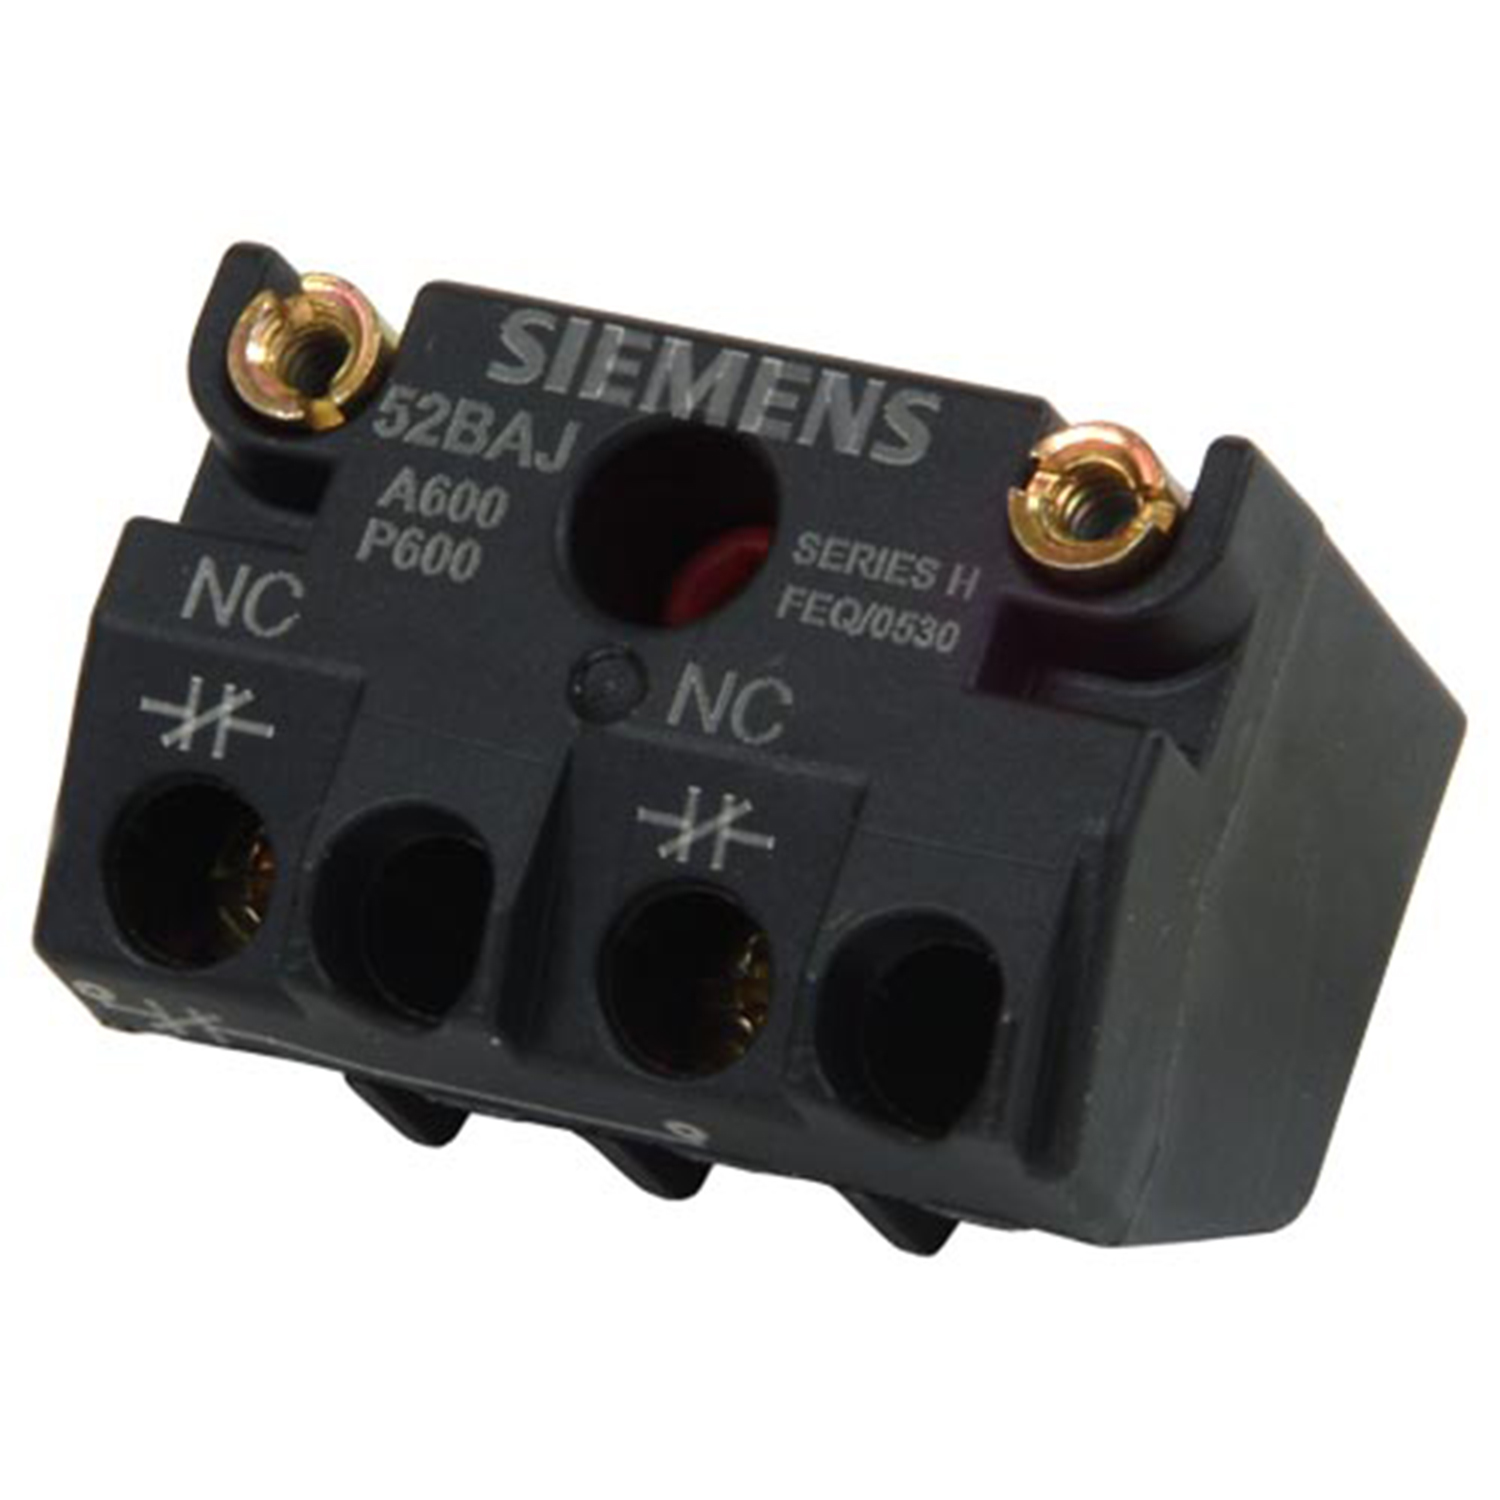 Accessory Switch Component contact block with 1 contact element screw terminal